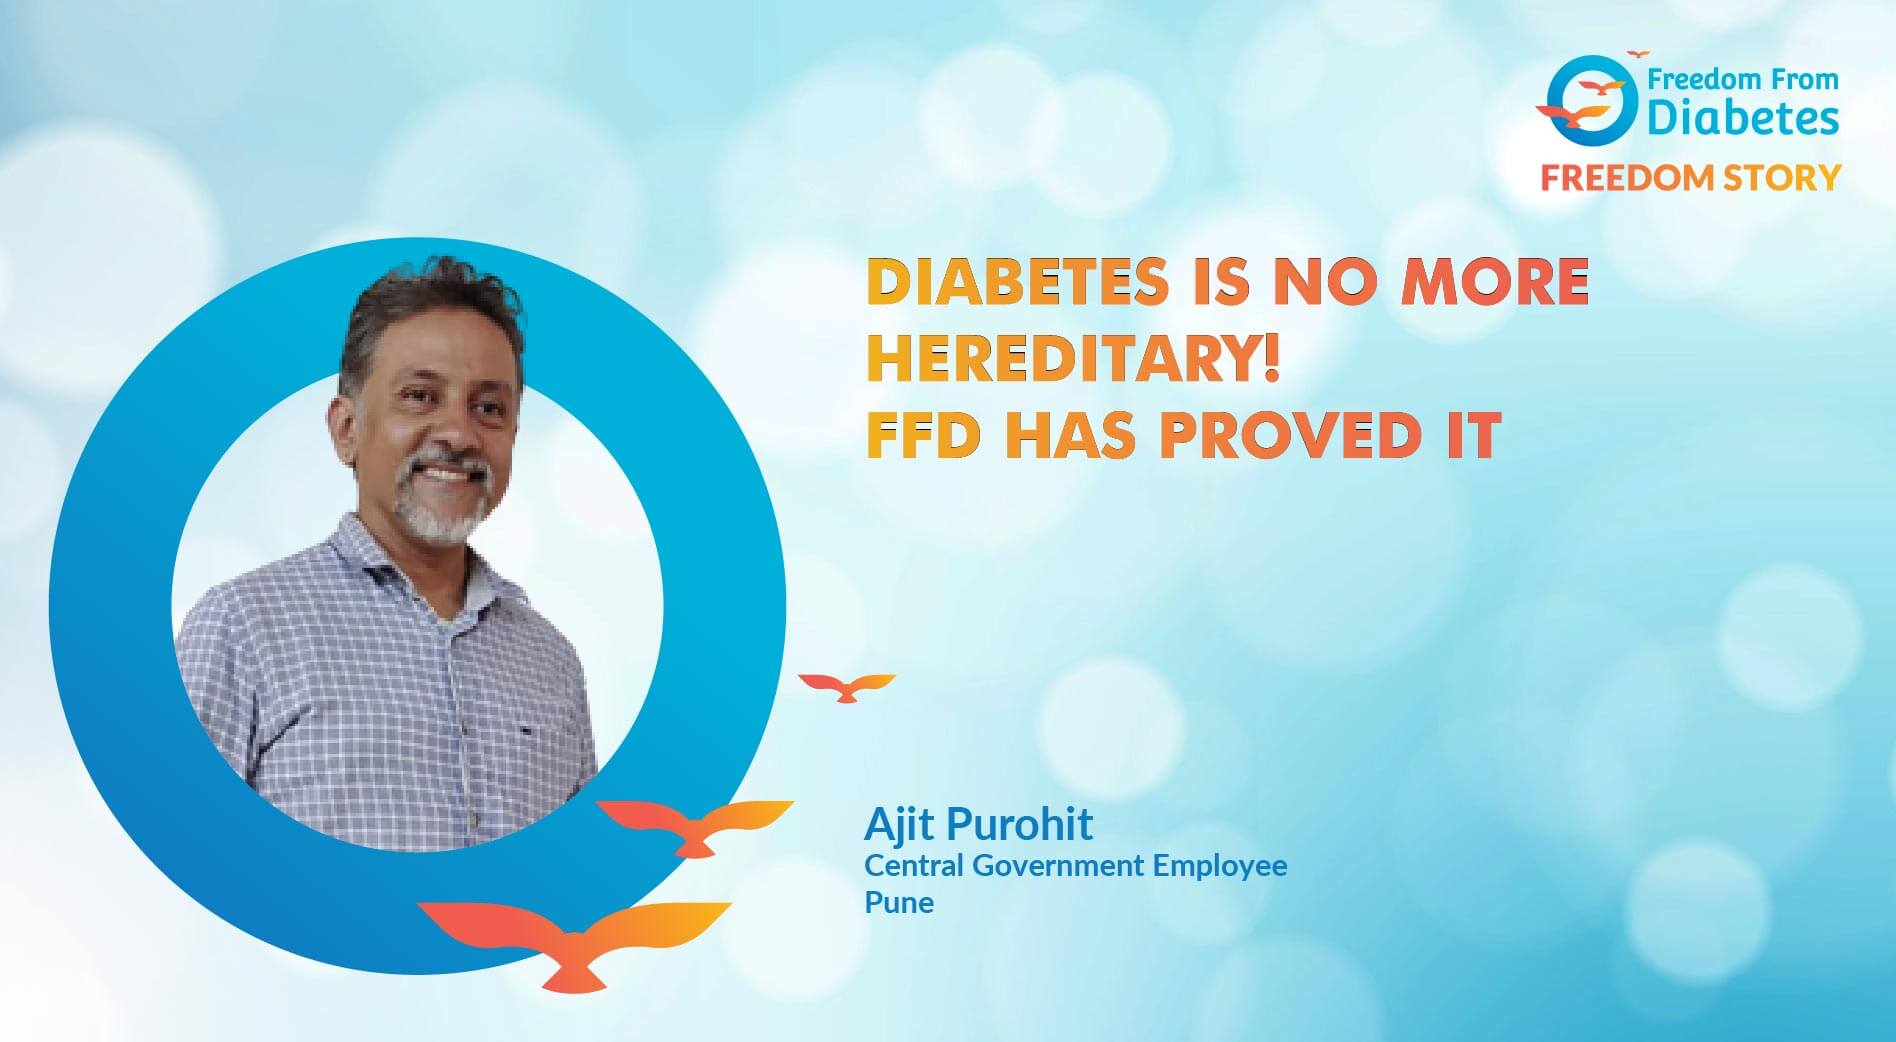 Diabetes is no more hereditary!